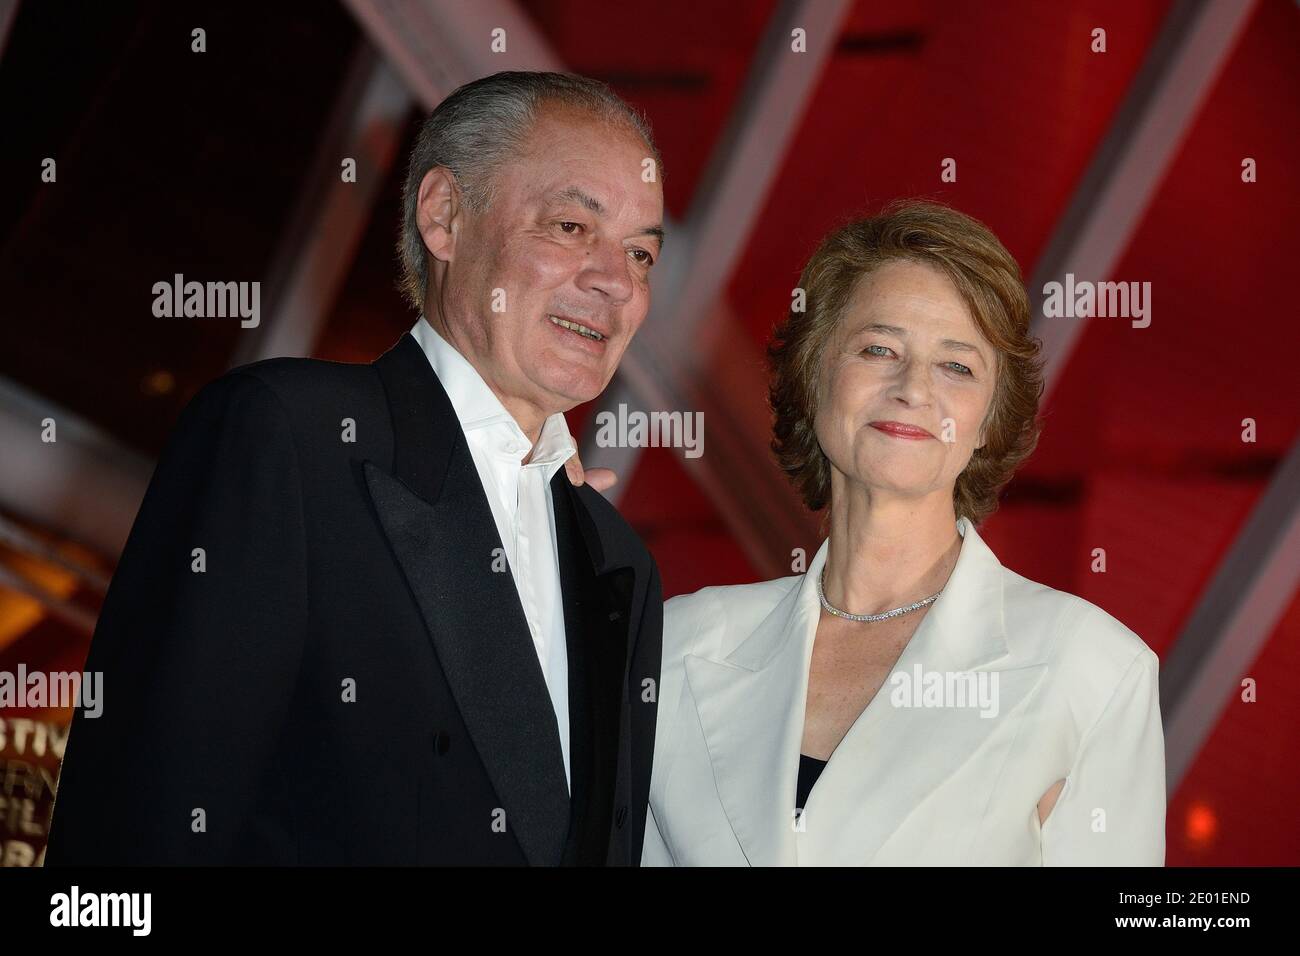 Jean-Noel Tassez and Charlotte Rampling arriving to the screening of the  film A Thousand Times Good Night as part of the 13th Marrakech Film  Festival, Morocco on November 30, 2013. Photo by